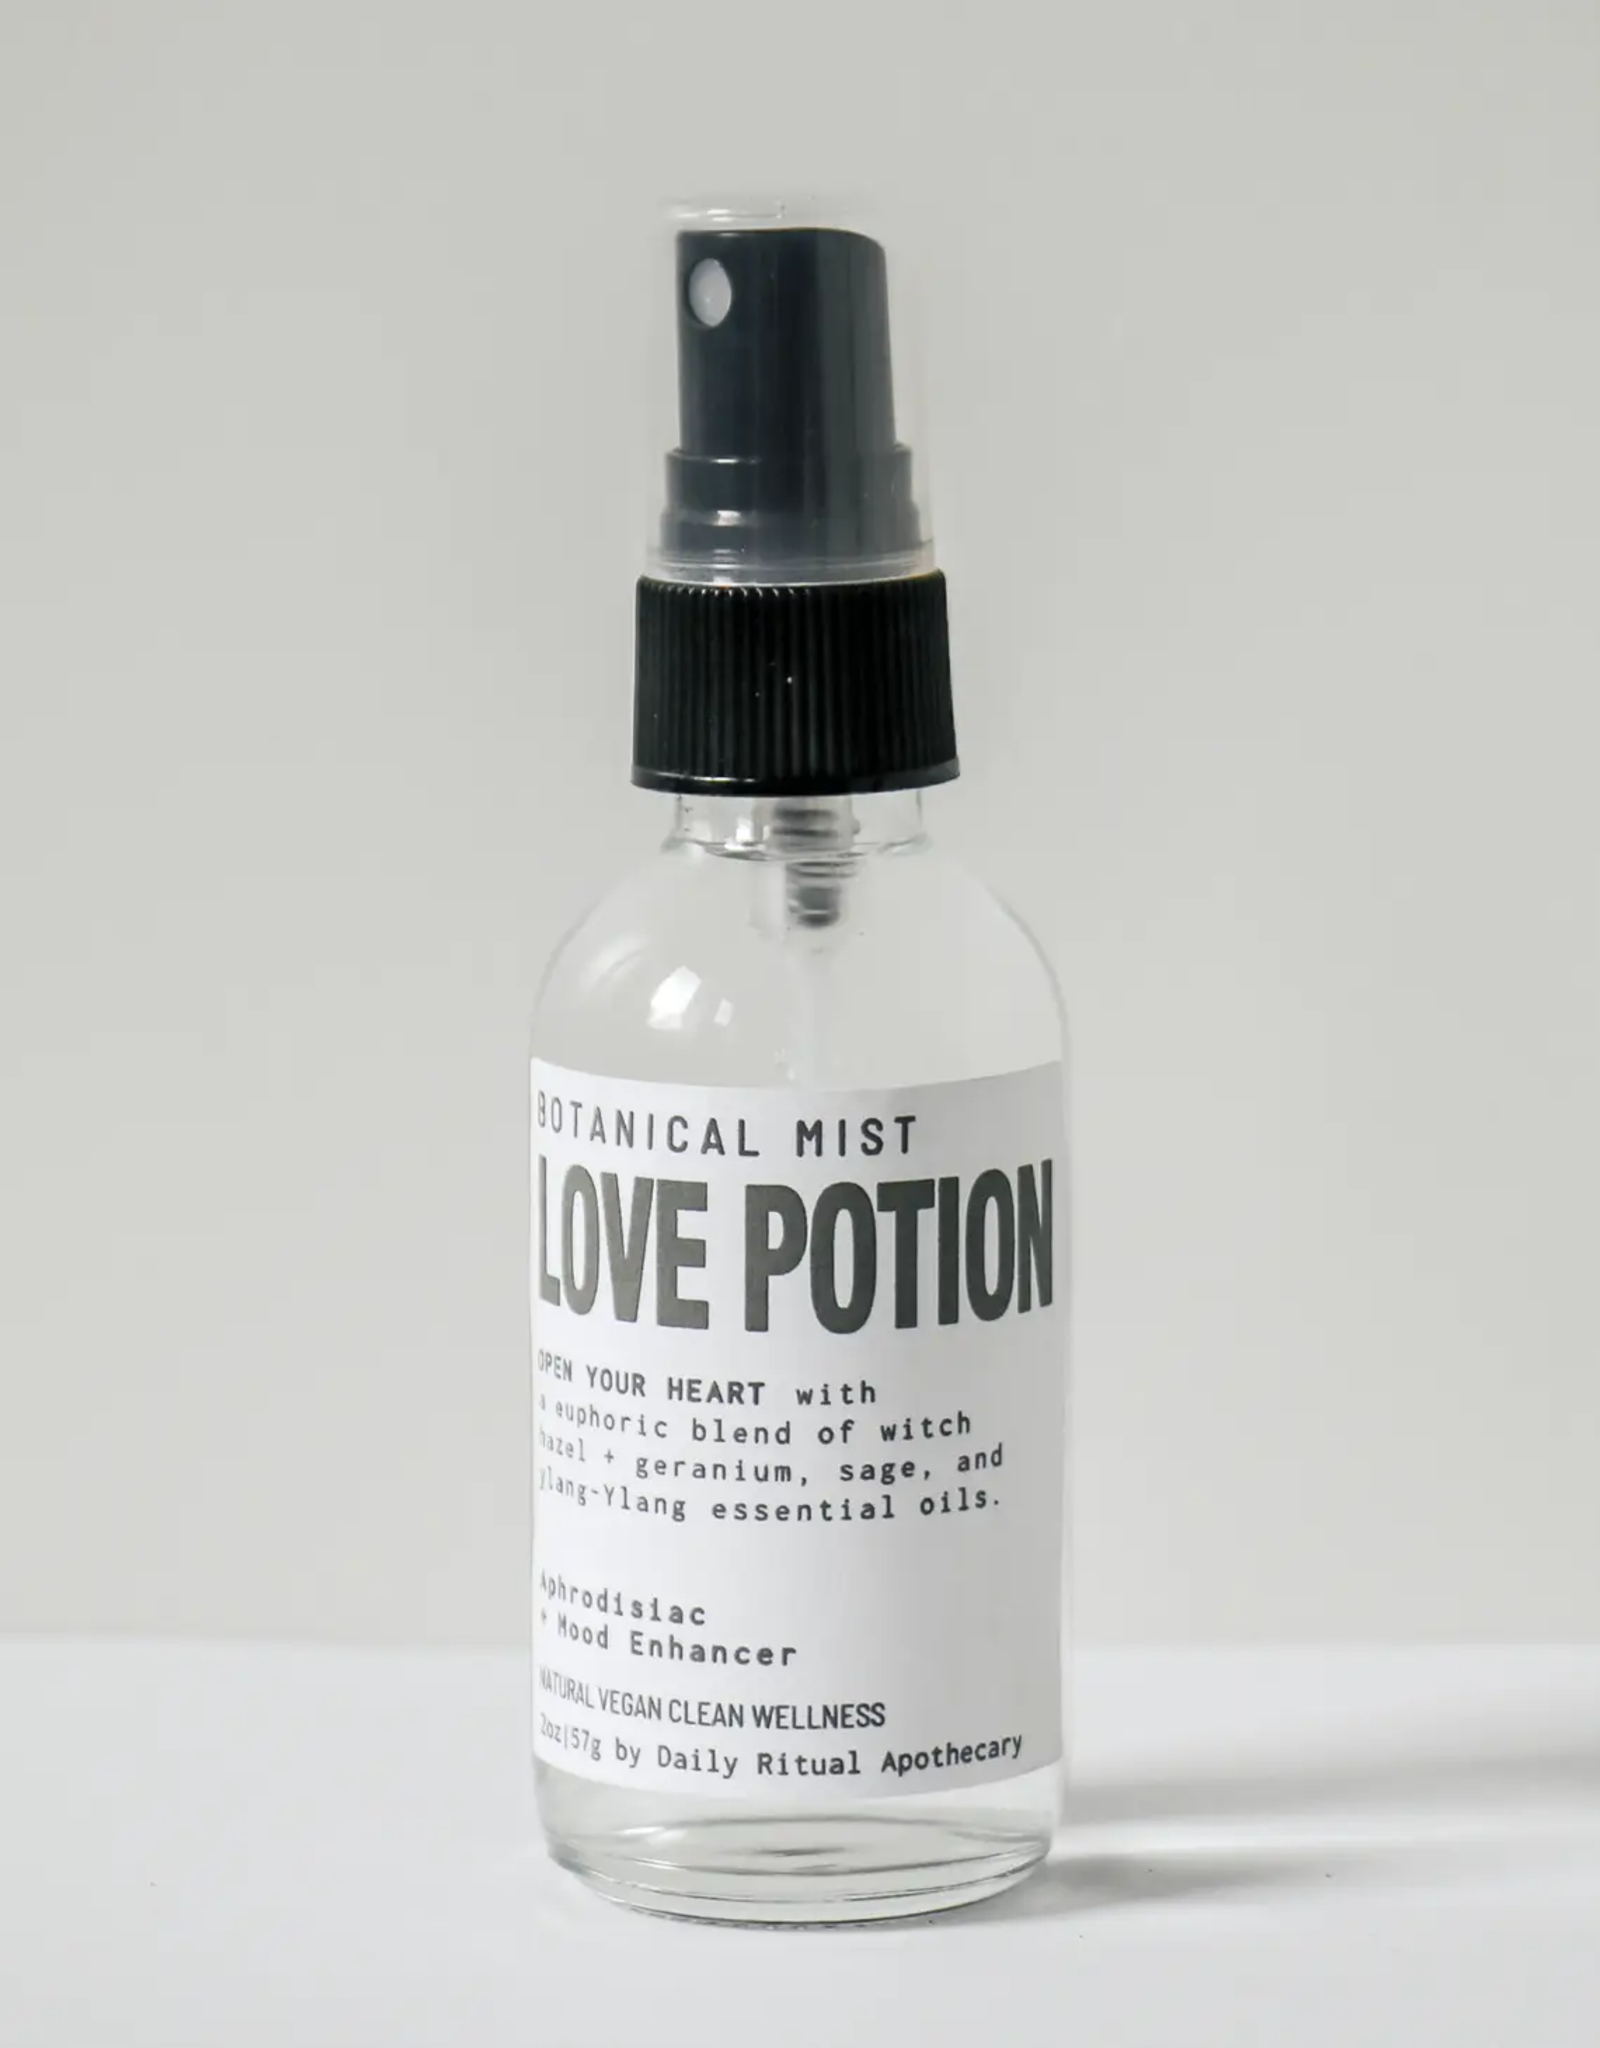 Daily Ritual Apothecary Love Potion Botanical Mist